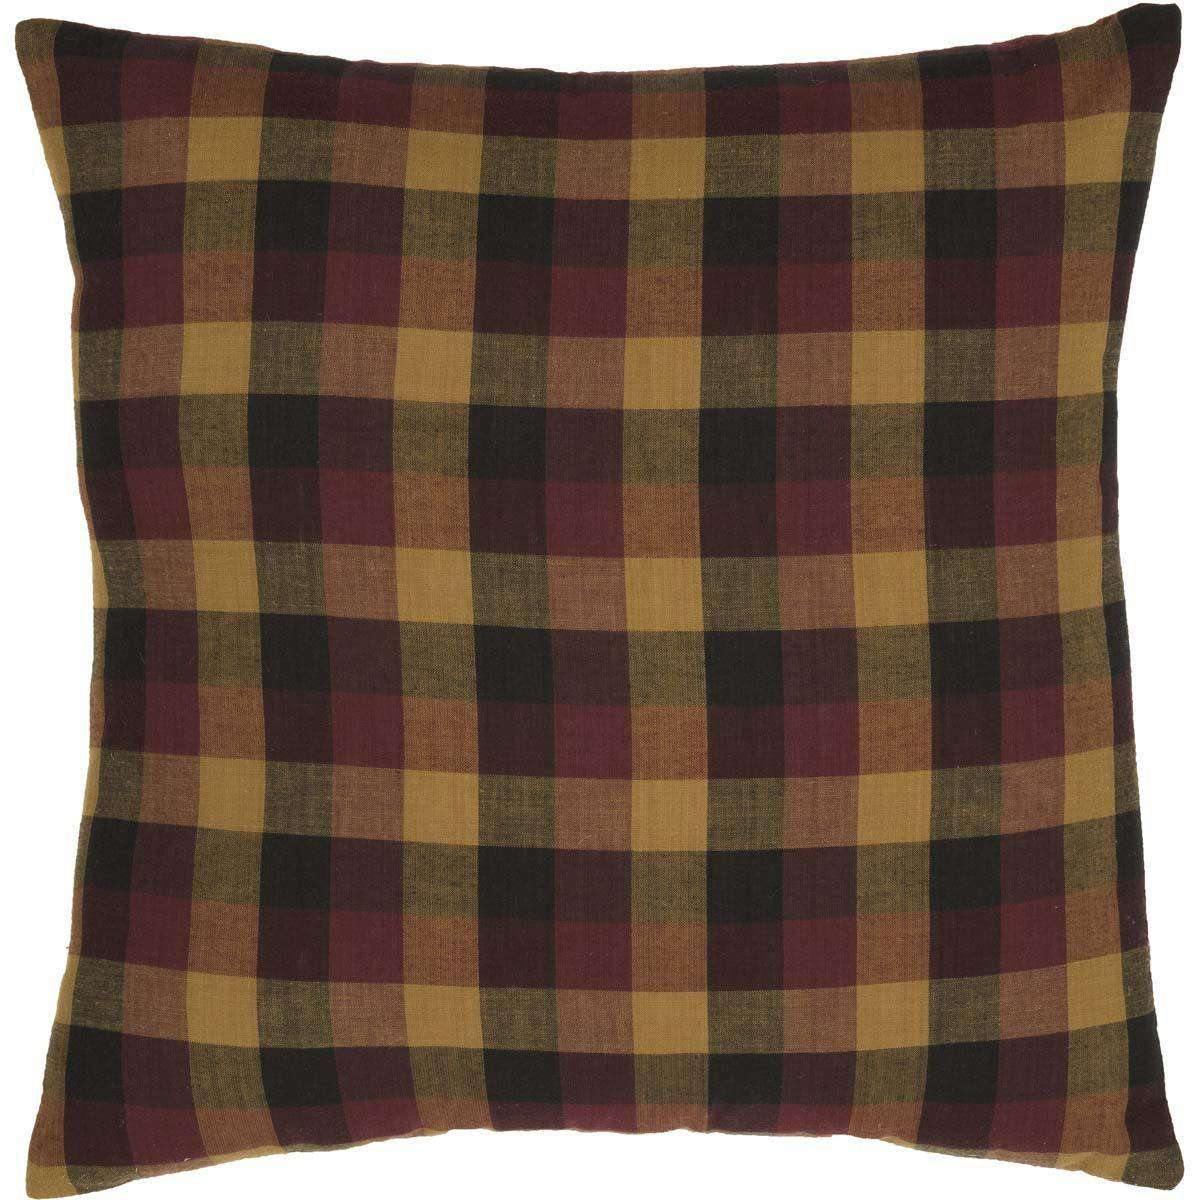 Heritage Farms Primitive Check Fabric Pillow 16x16 front